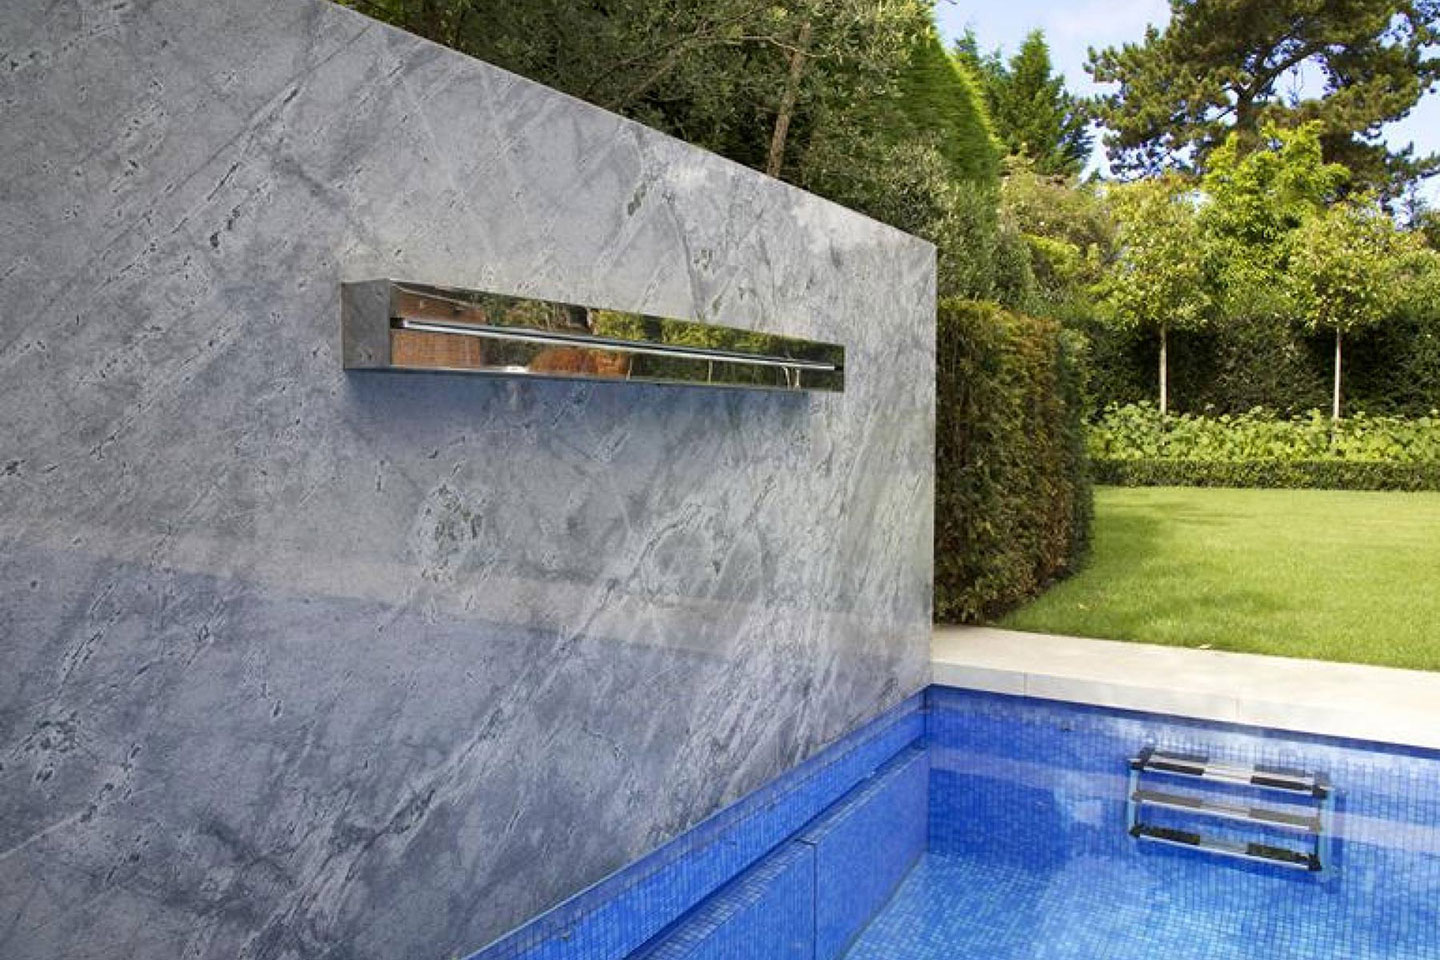 Bespoke Design for a Guncast Outdoor Swimming Pool in Surrey